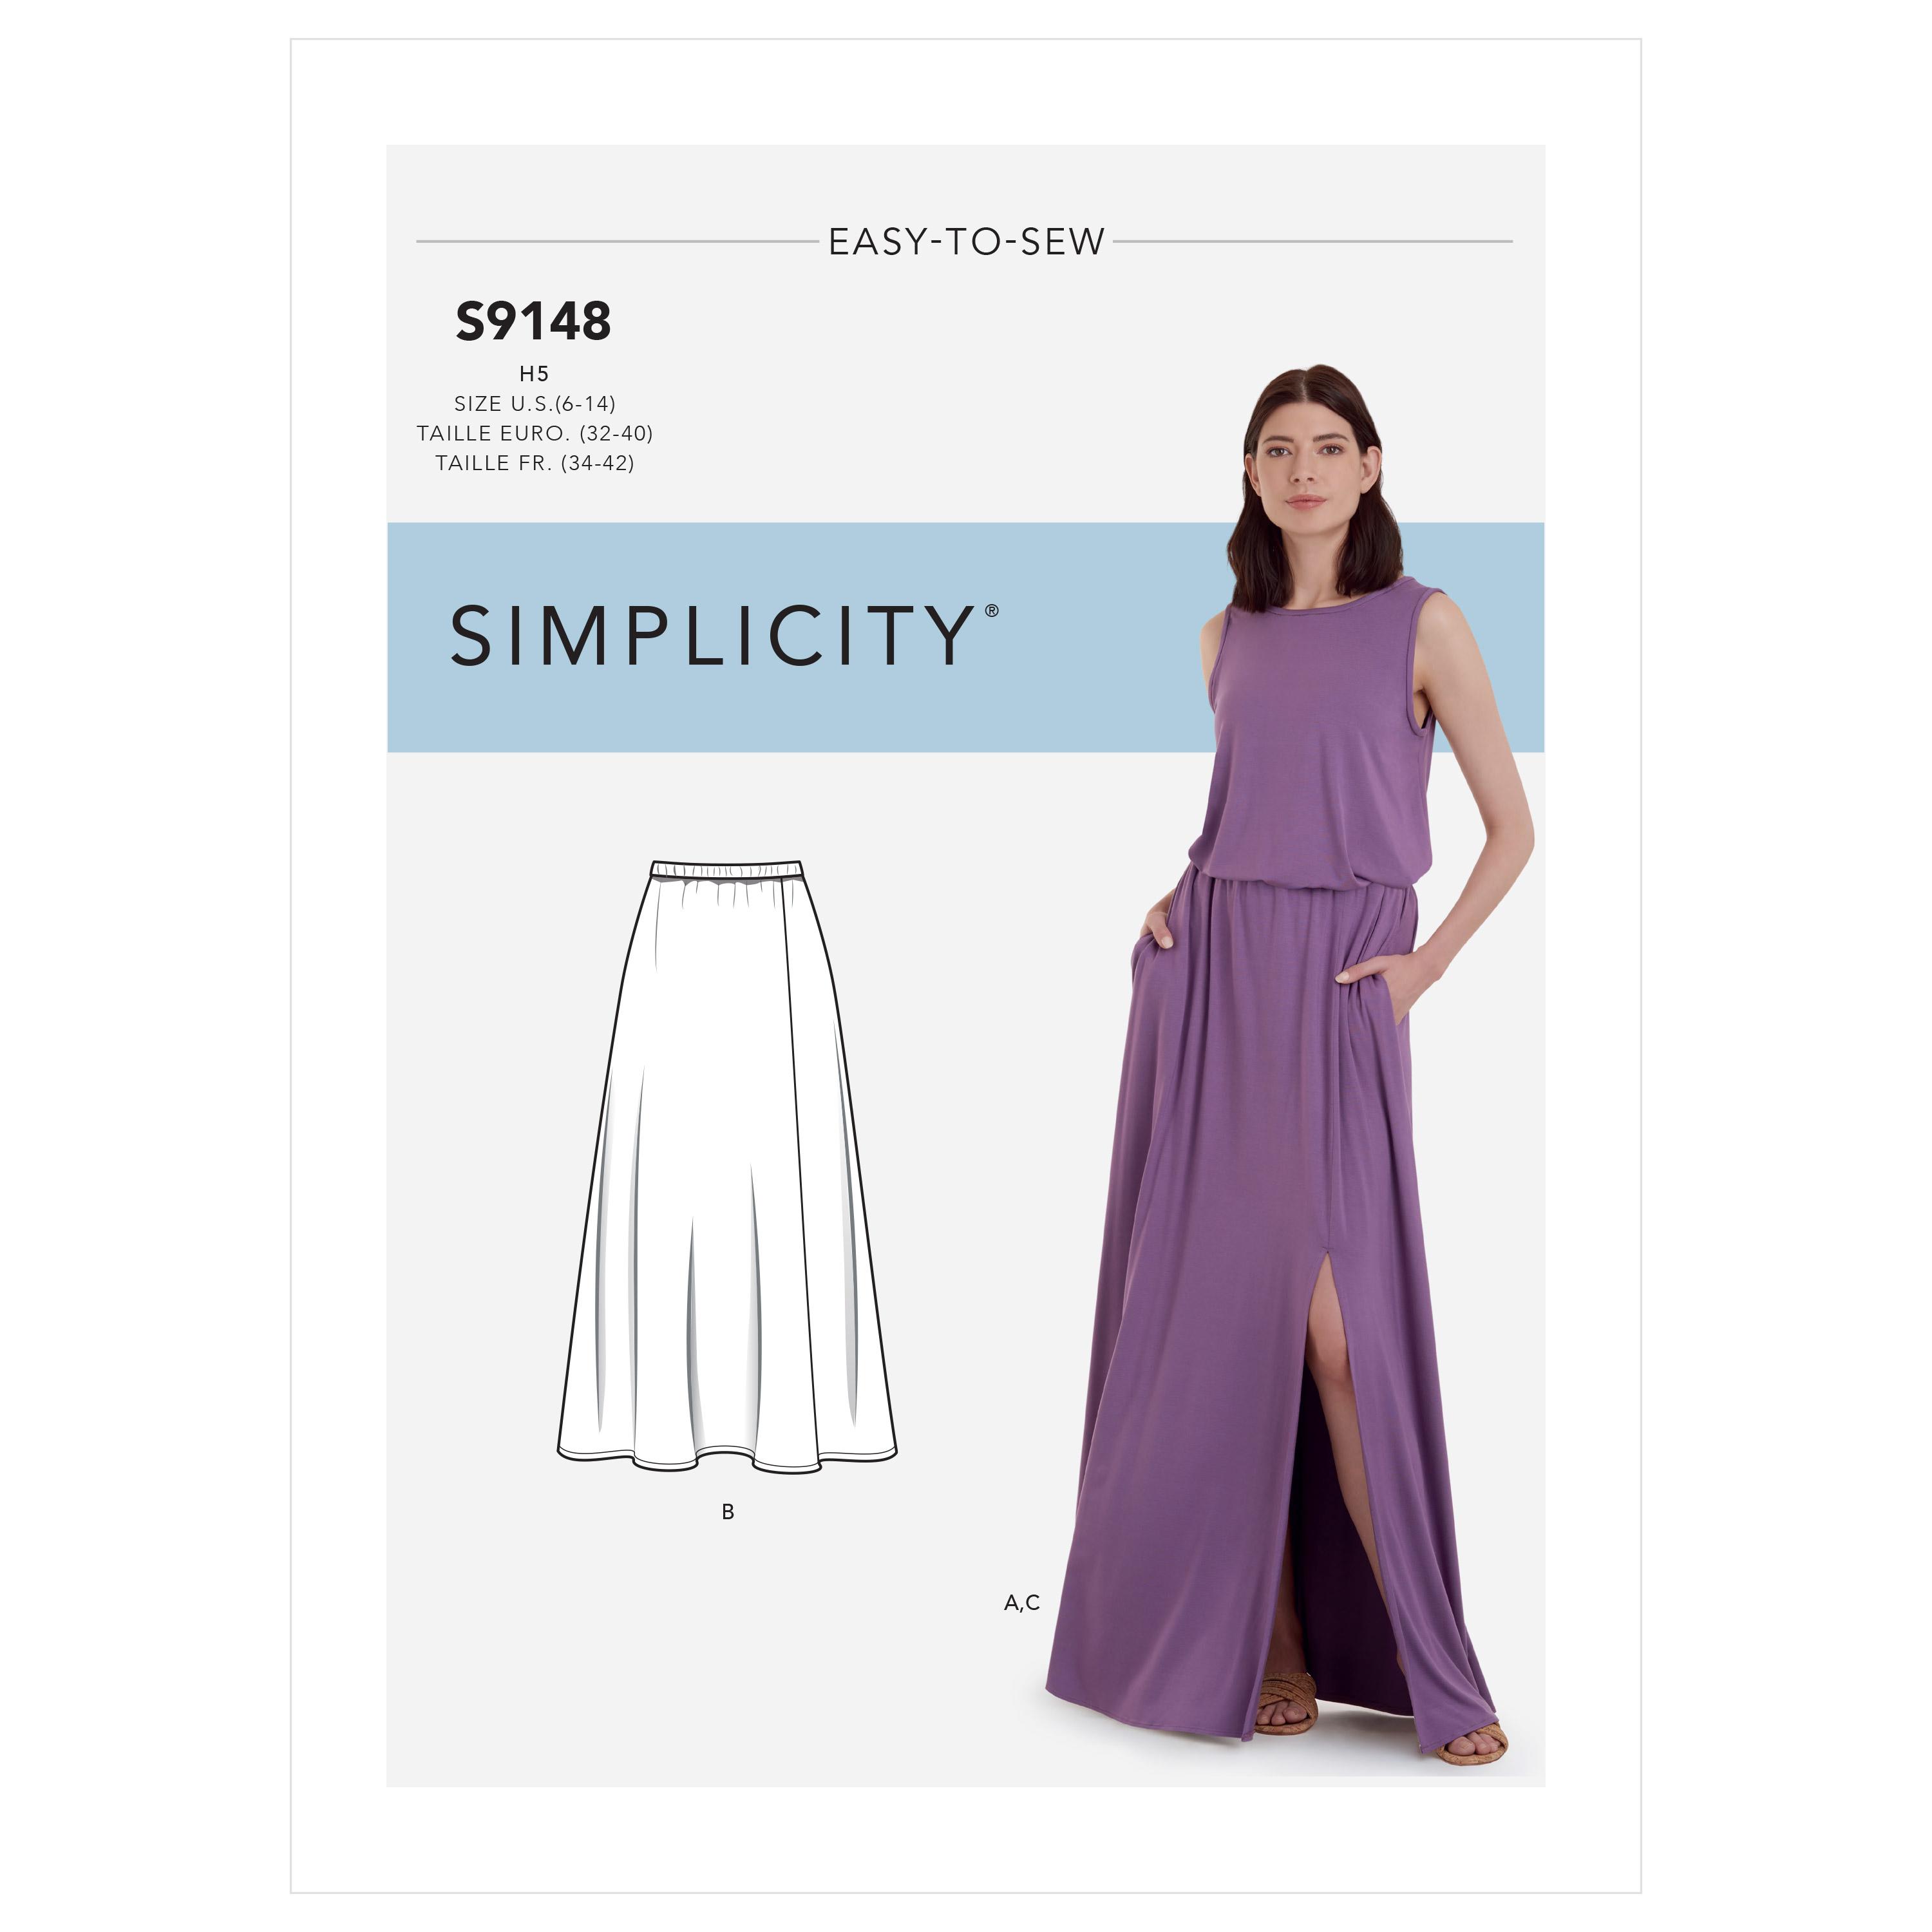 Simplicity S9148 Misses' Skirts & Top